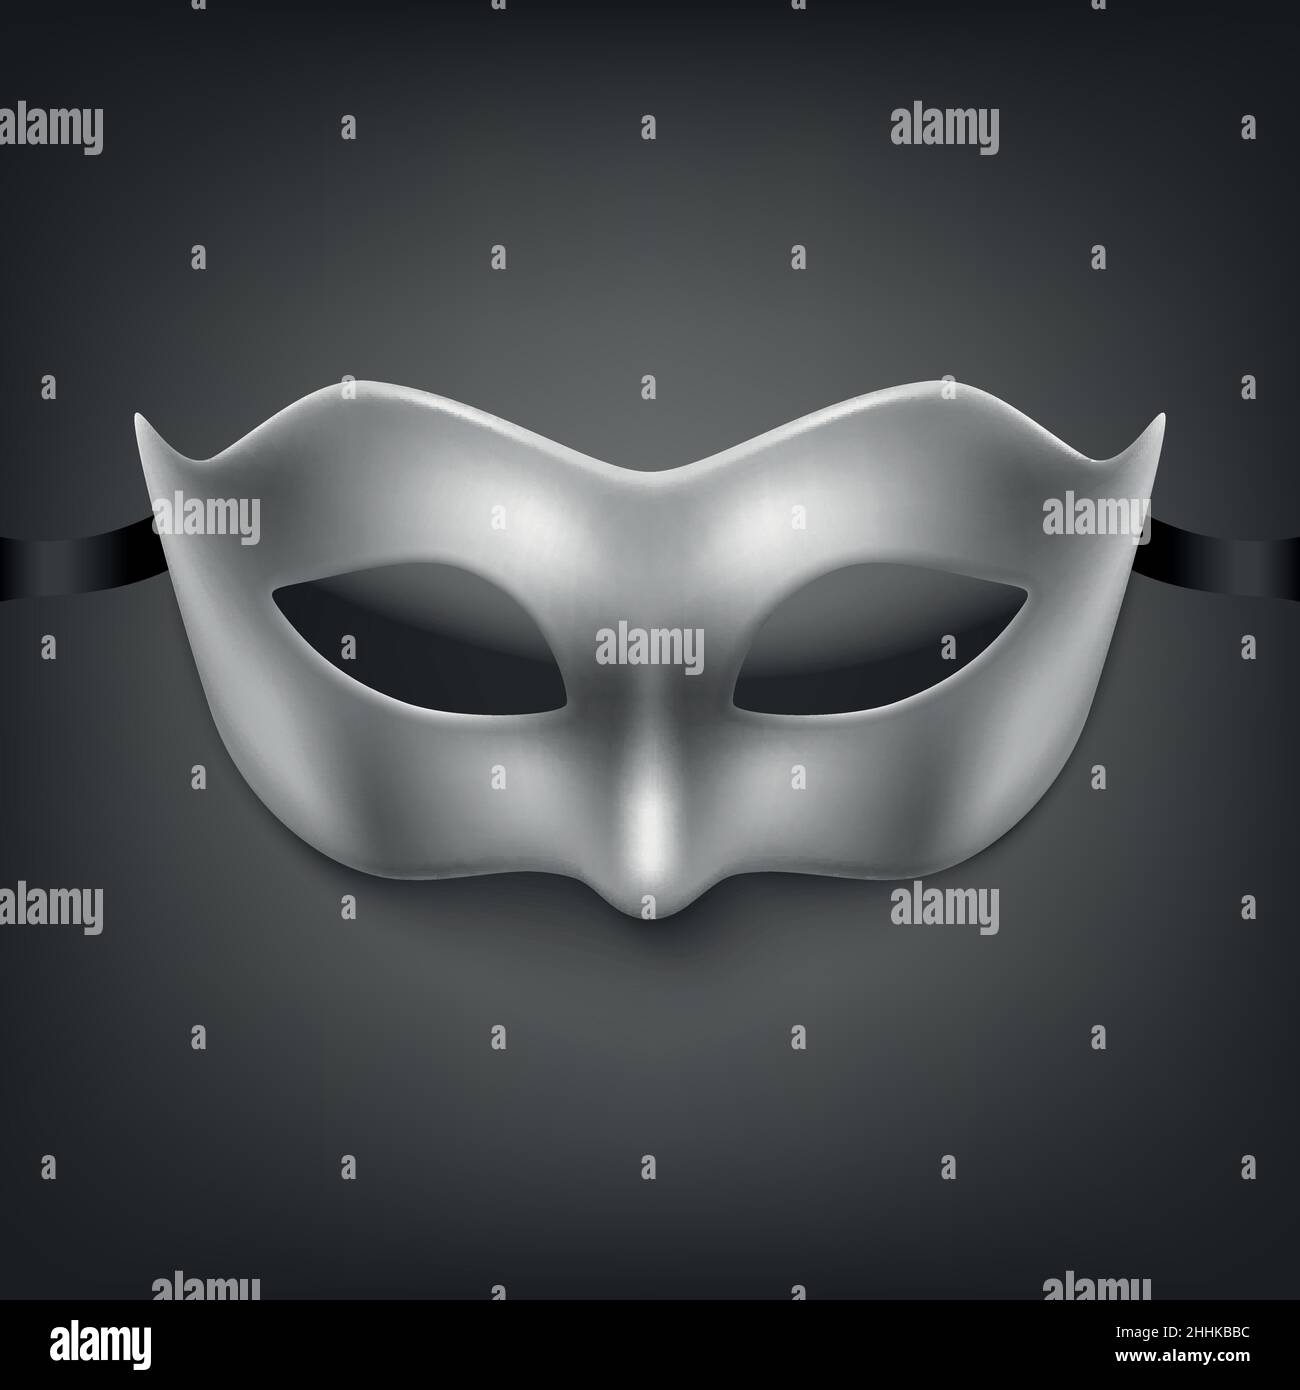 Vector 3d Realistic Silver Carnival Face Maskon Black Background. Mask for Party, Masquerade Closeup. Design Template of Mask for Man, Woman. Carnival Stock Vector